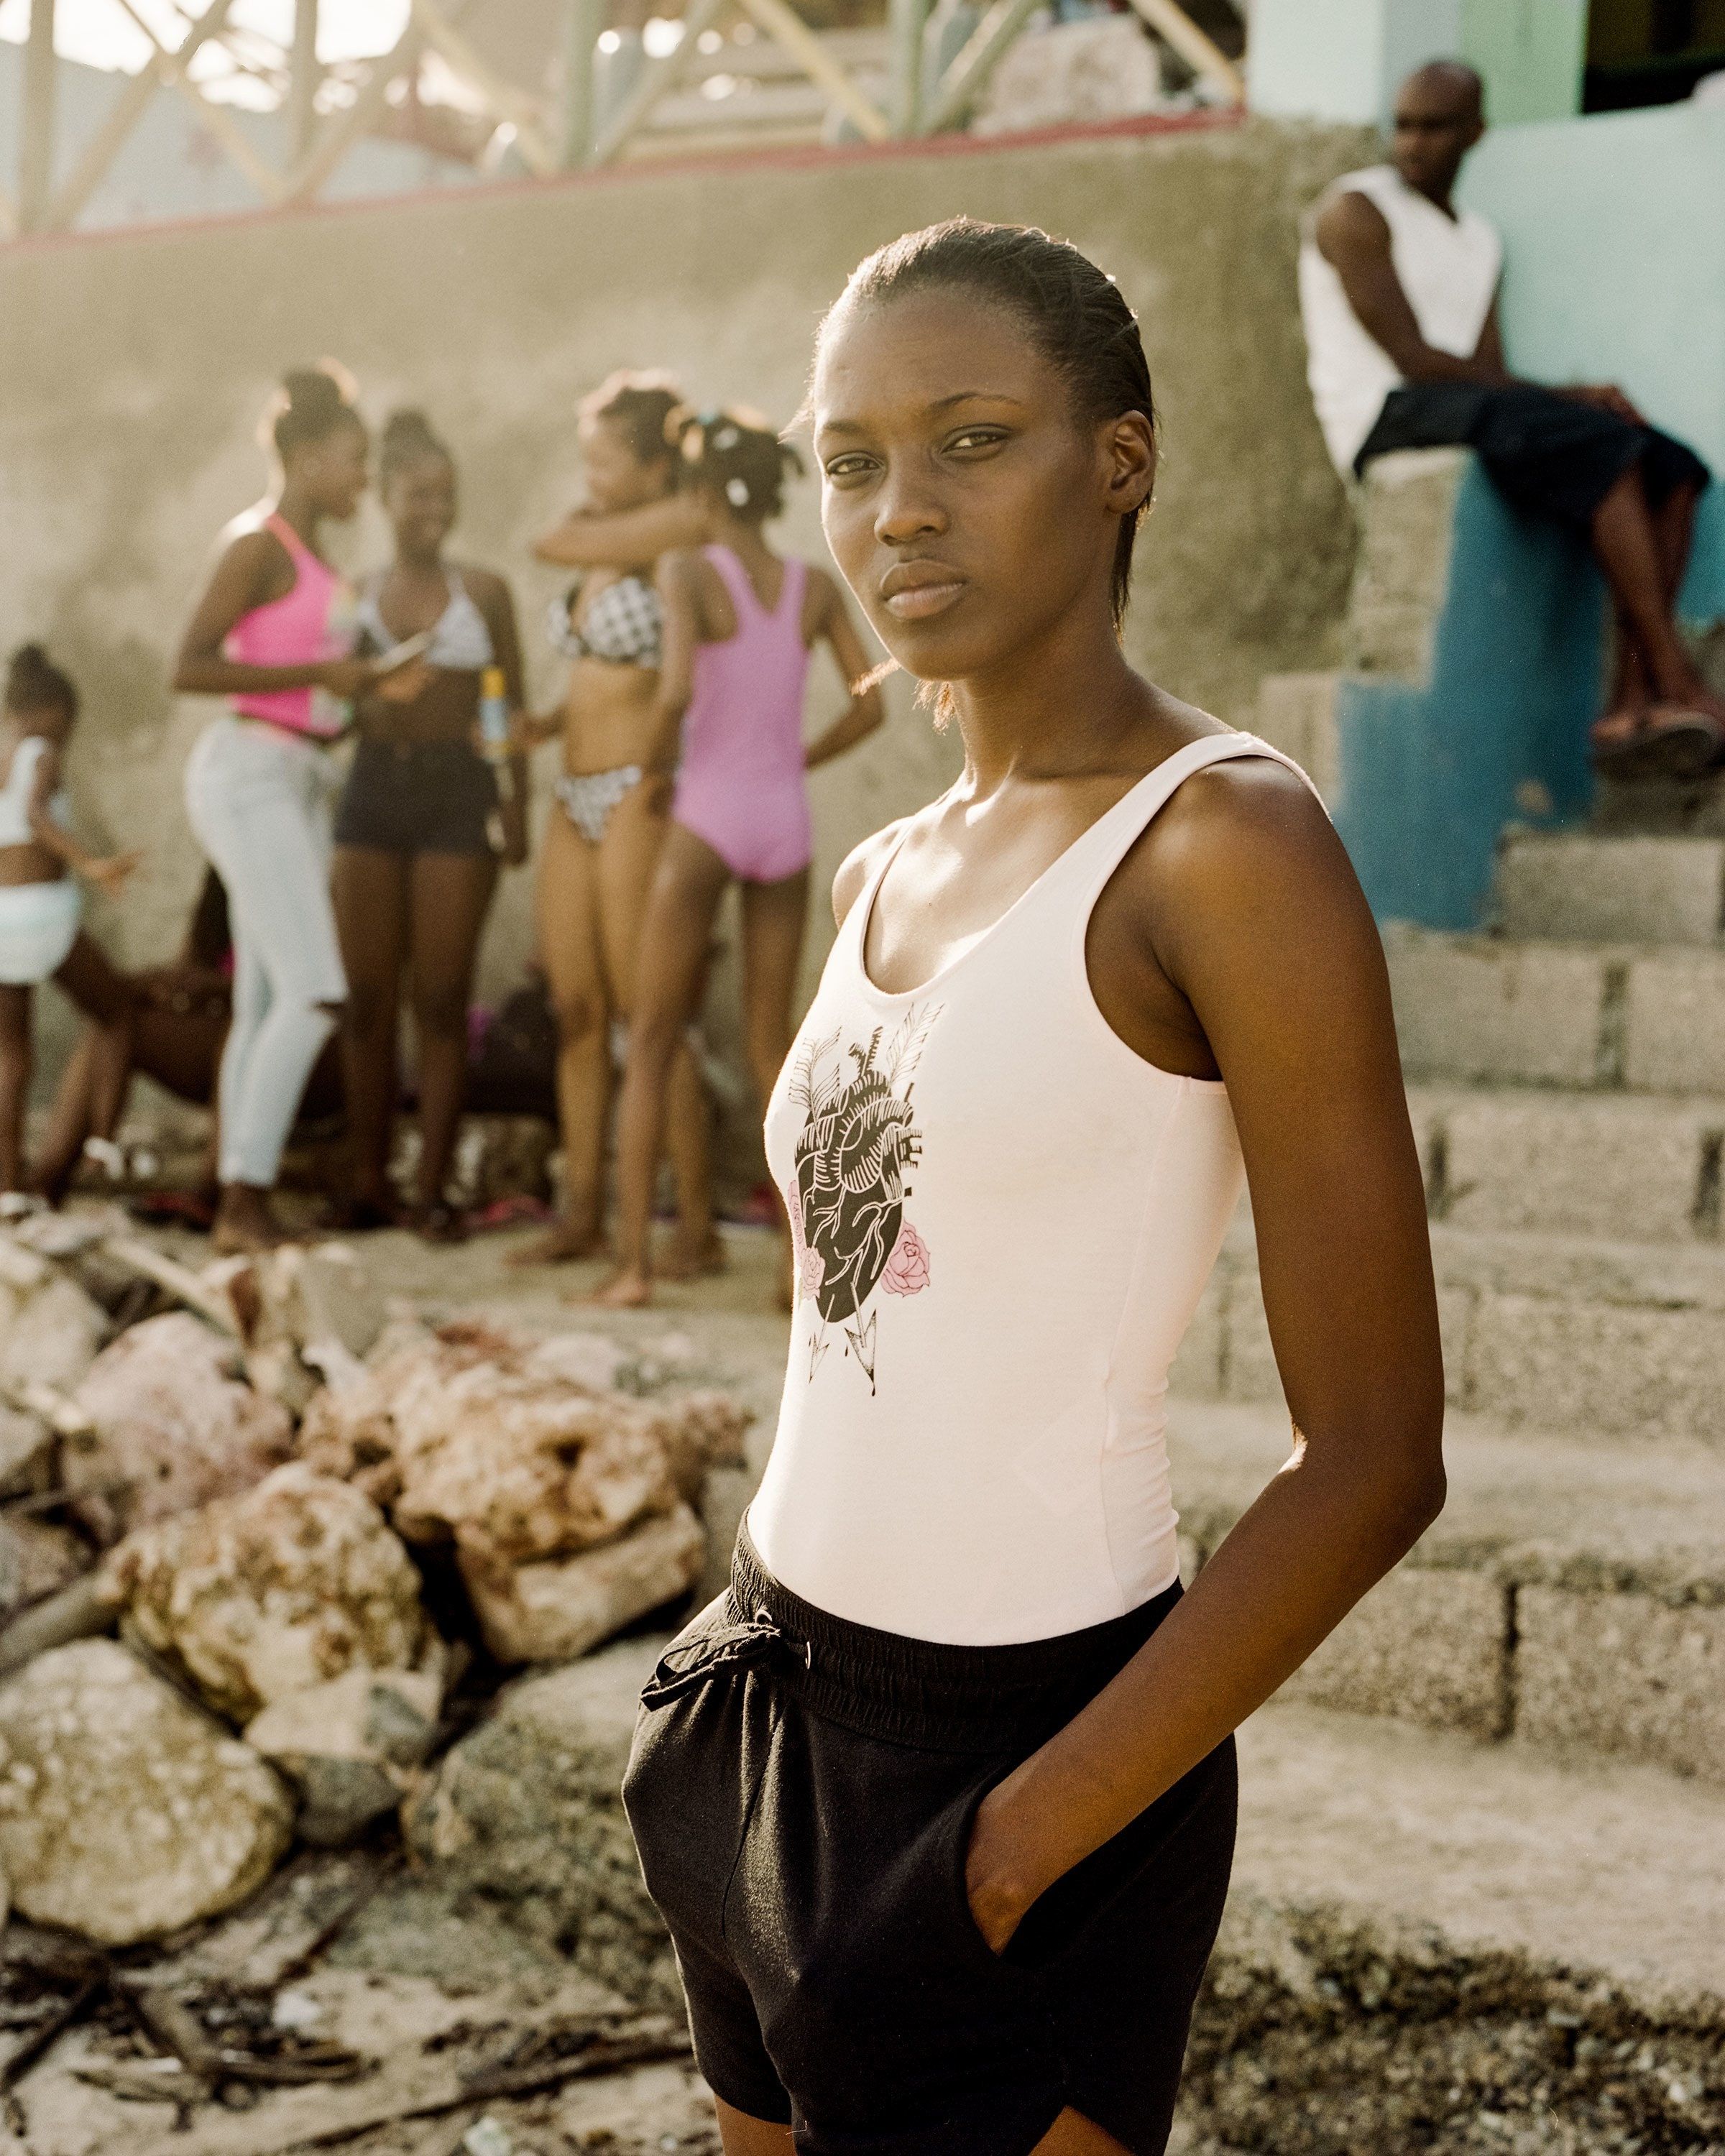 Woman in Jamaica